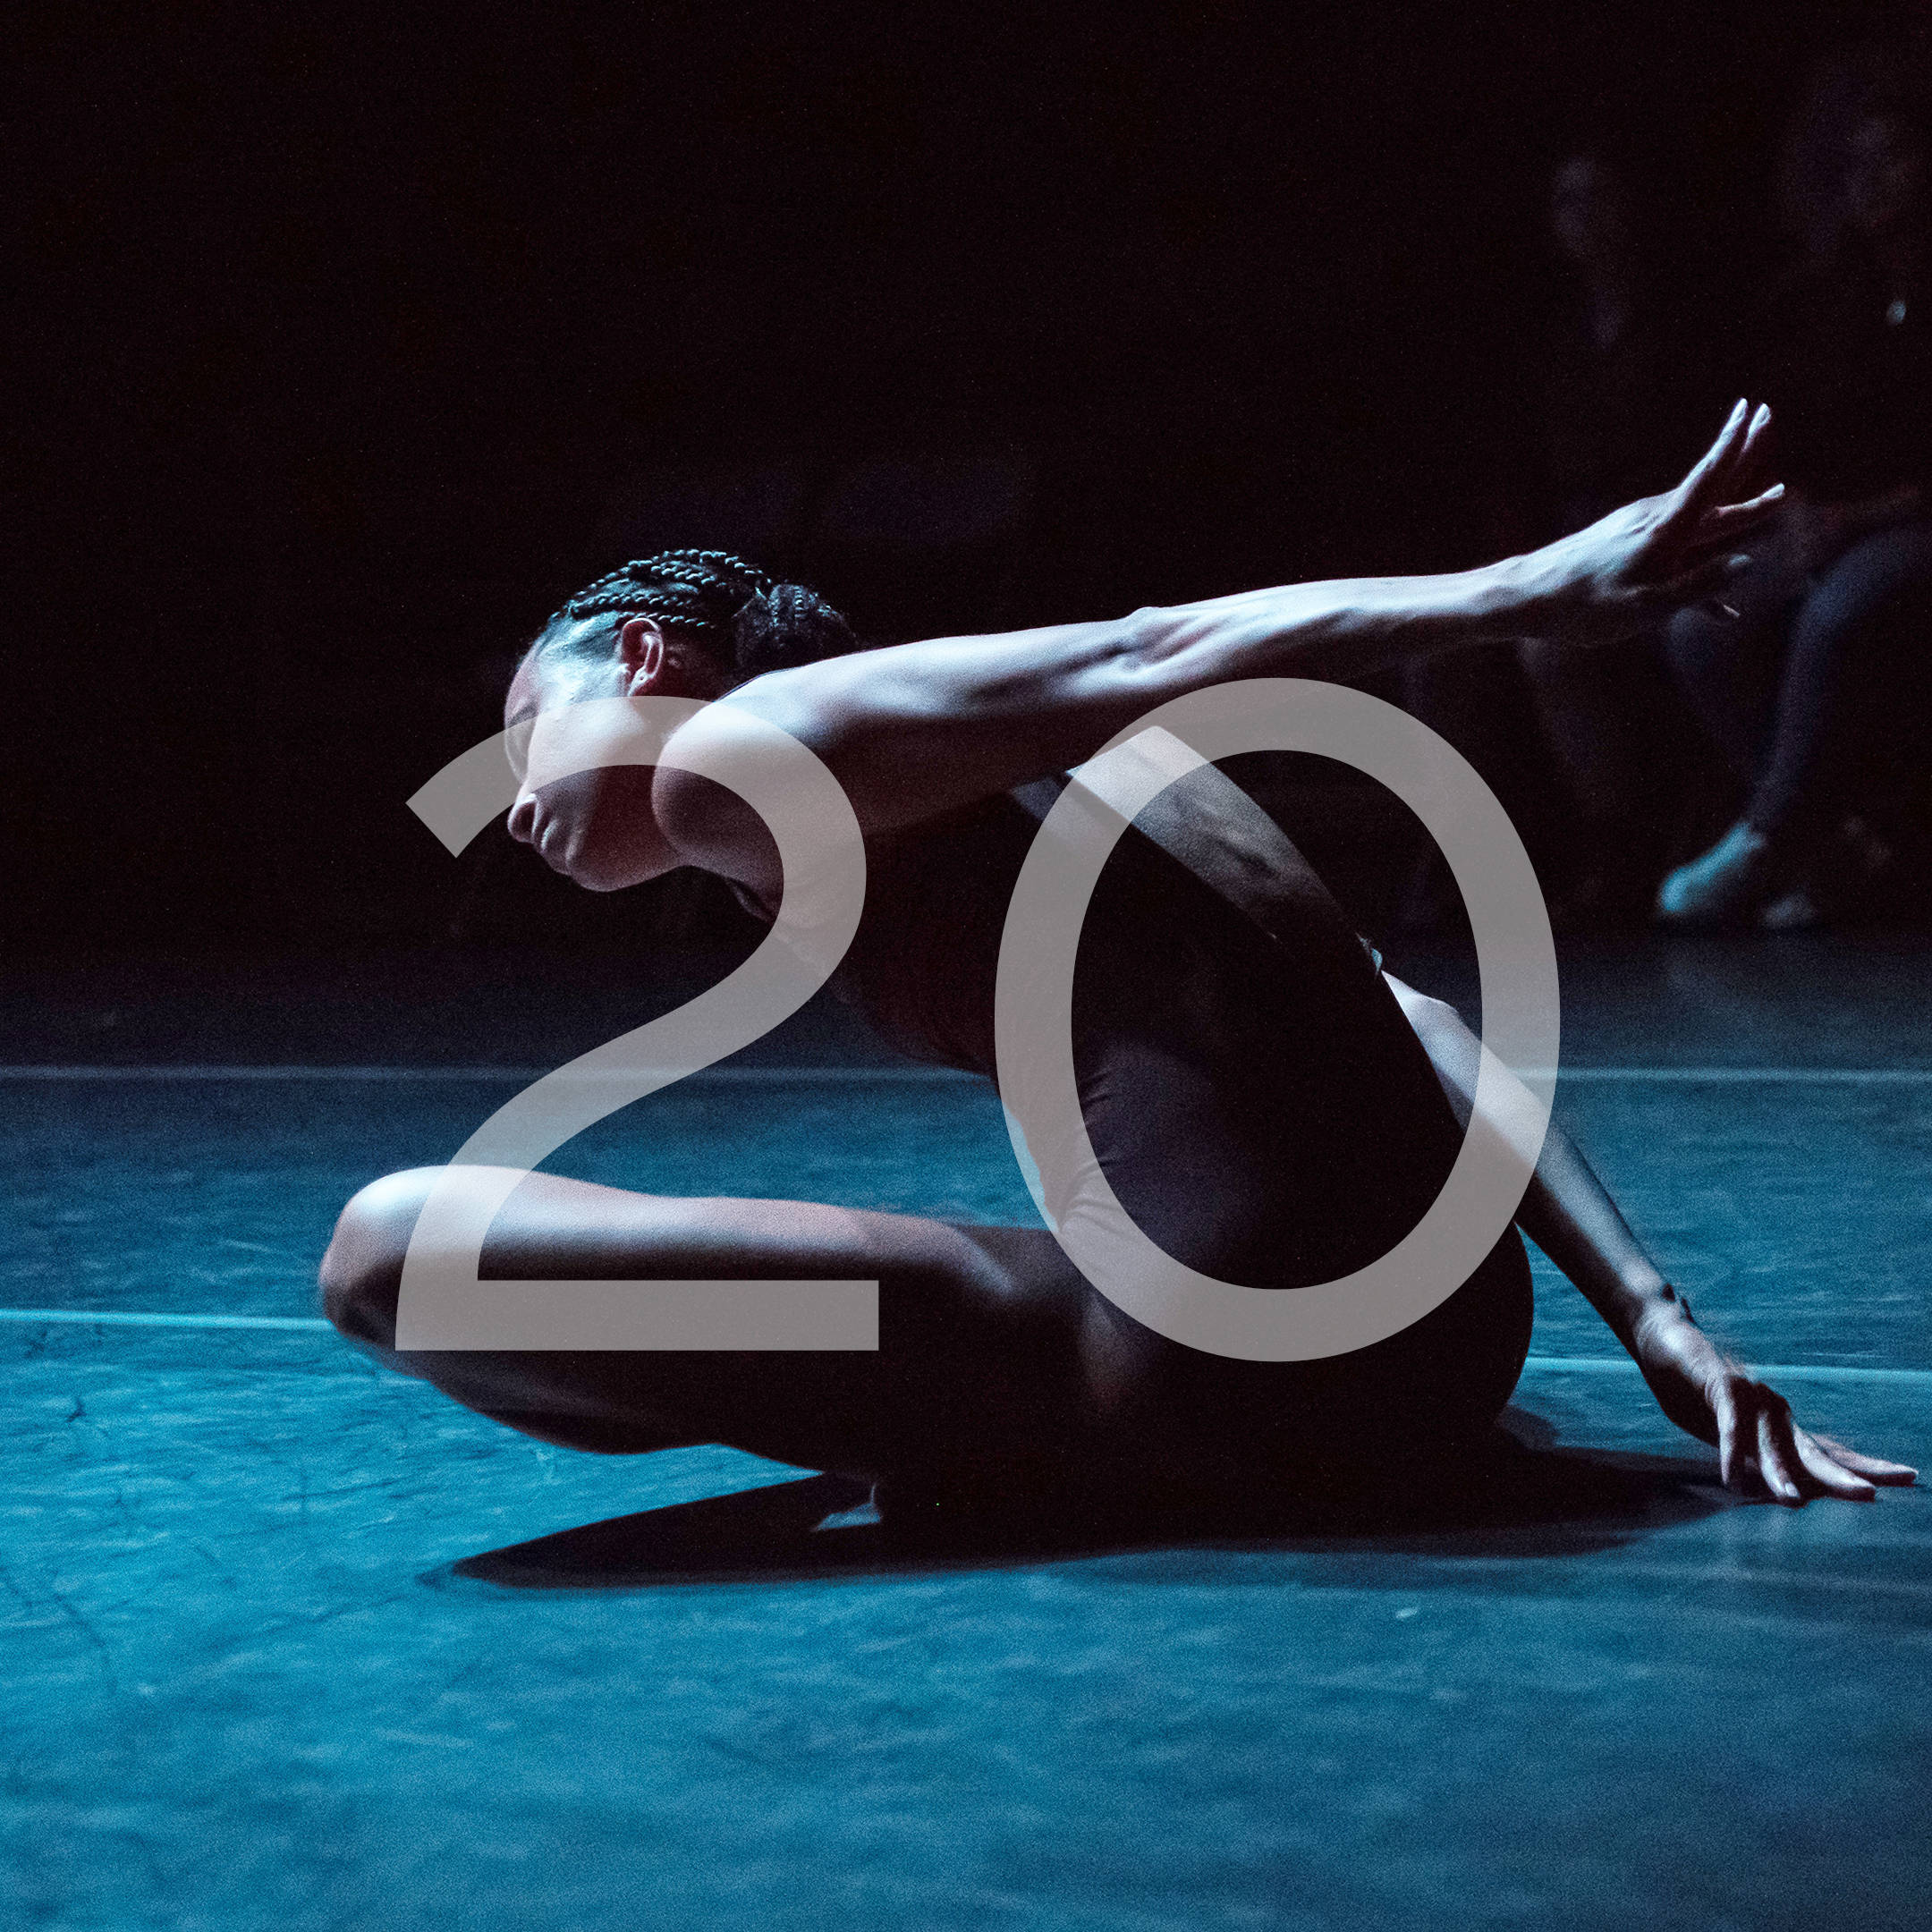 Festival:21 Artist, Tom Tsai performing a breakdance movement in 'A Place to Call Home'.